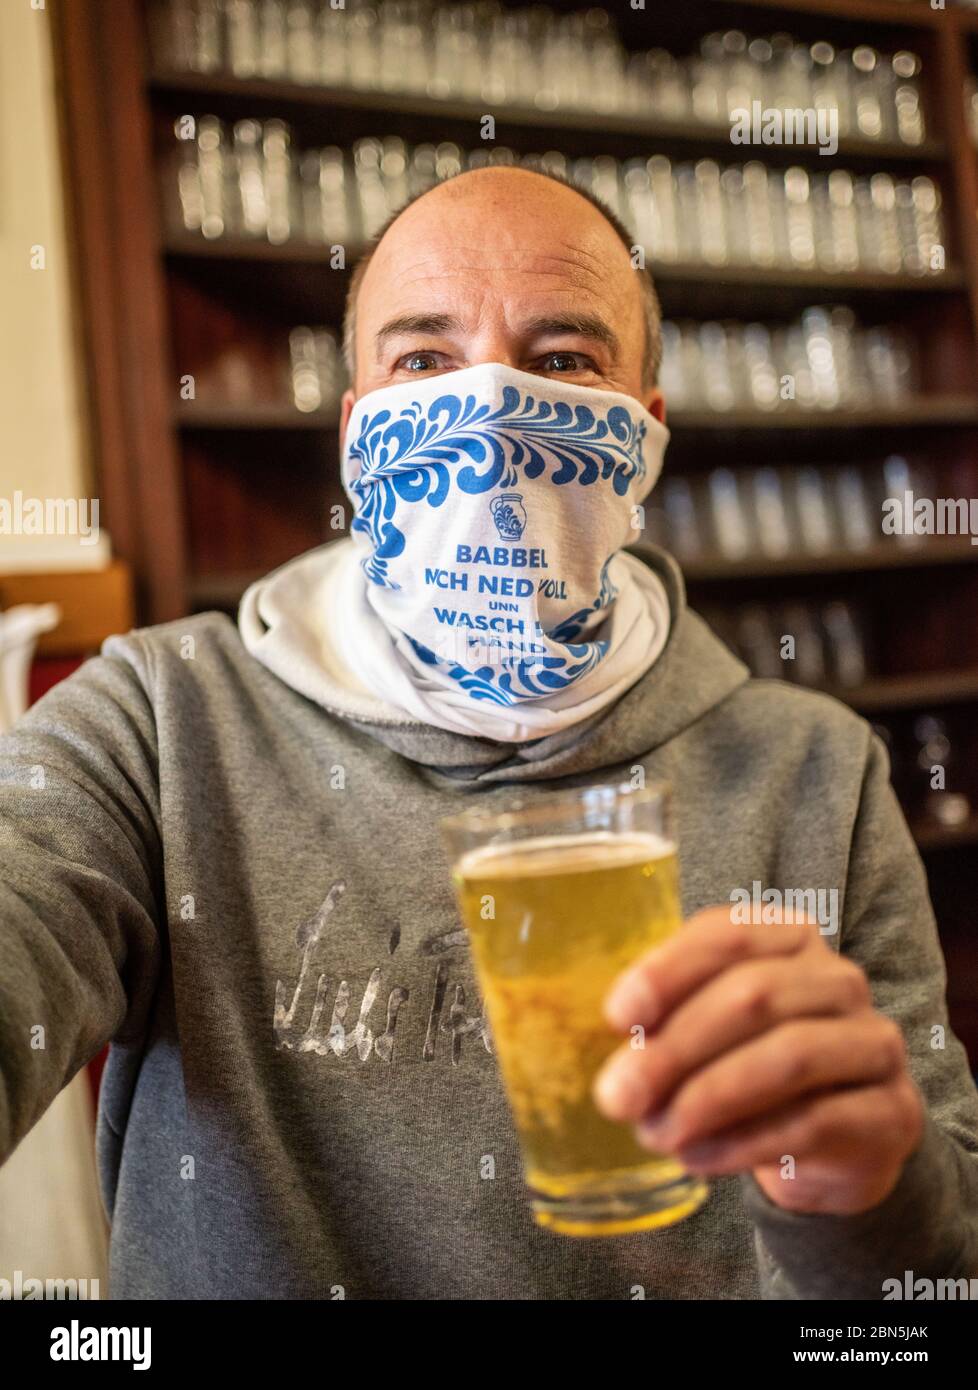 12 May 2020, Hessen, Frankfurt/Main: Ralf Wagner (53), owner of the cider bar 'Wagner', stands behind the counter with a face cloth with the Hessian inscription 'Babbel mich ned voll unn wasch dei Händ' (Don't talk me full and wash your hands). Due to the Corona pandemic, the traditional company still only offers take-away food. From this Friday (15.05) restaurants, cafés and pubs in Hesse are allowed to open to the public again. Hygiene and distance regulations must be observed. Photo: Frank Rumpenhorst/dpa Stock Photo